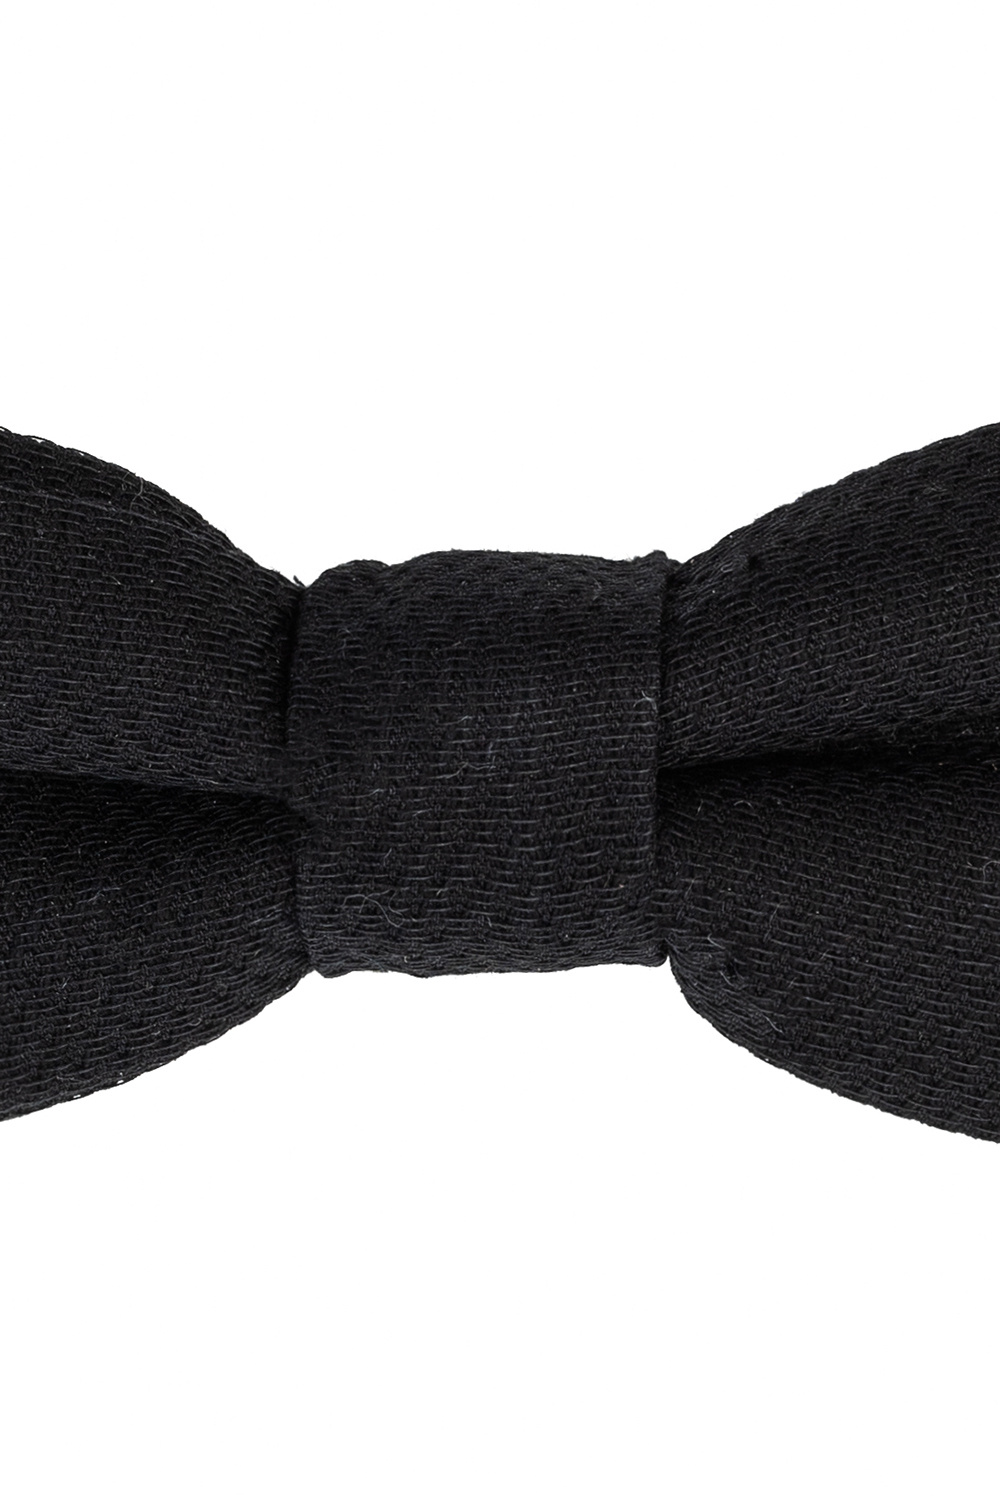 Louis Vuitton Monogram Embroidered Bow Tie - Black Bow Ties